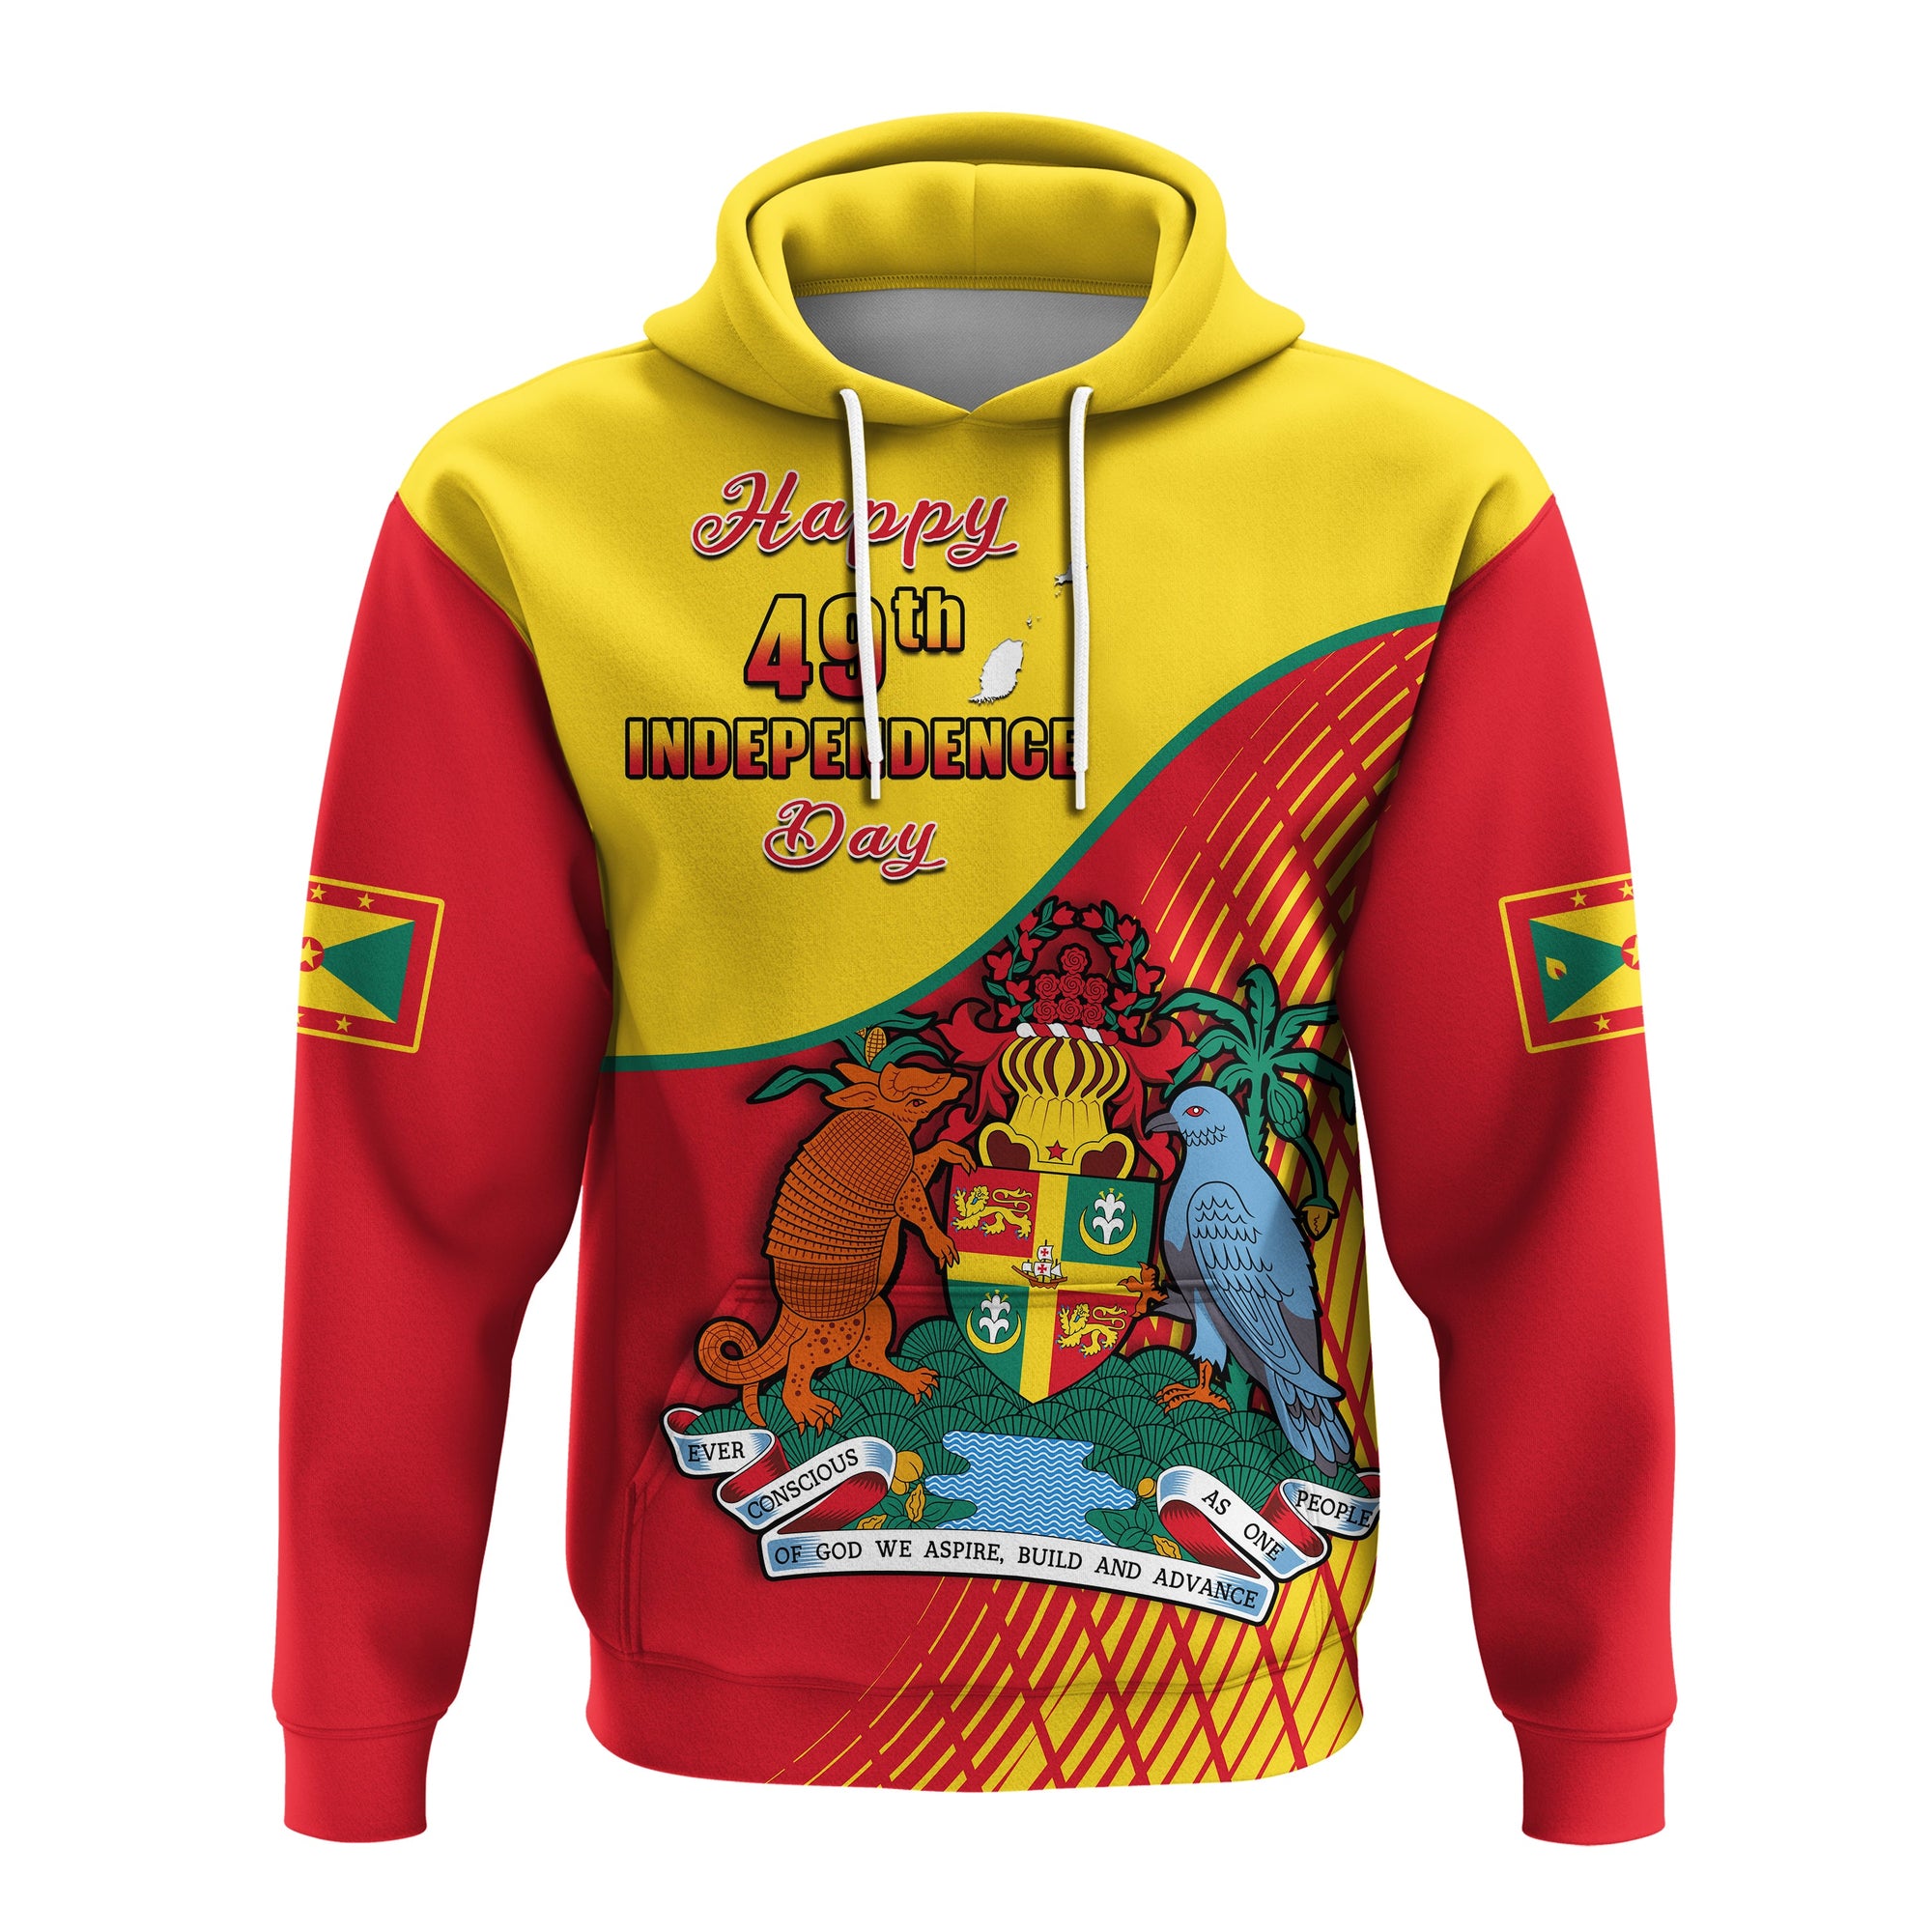 grenada-hoodie-coat-of-arms-happy-49th-independence-day